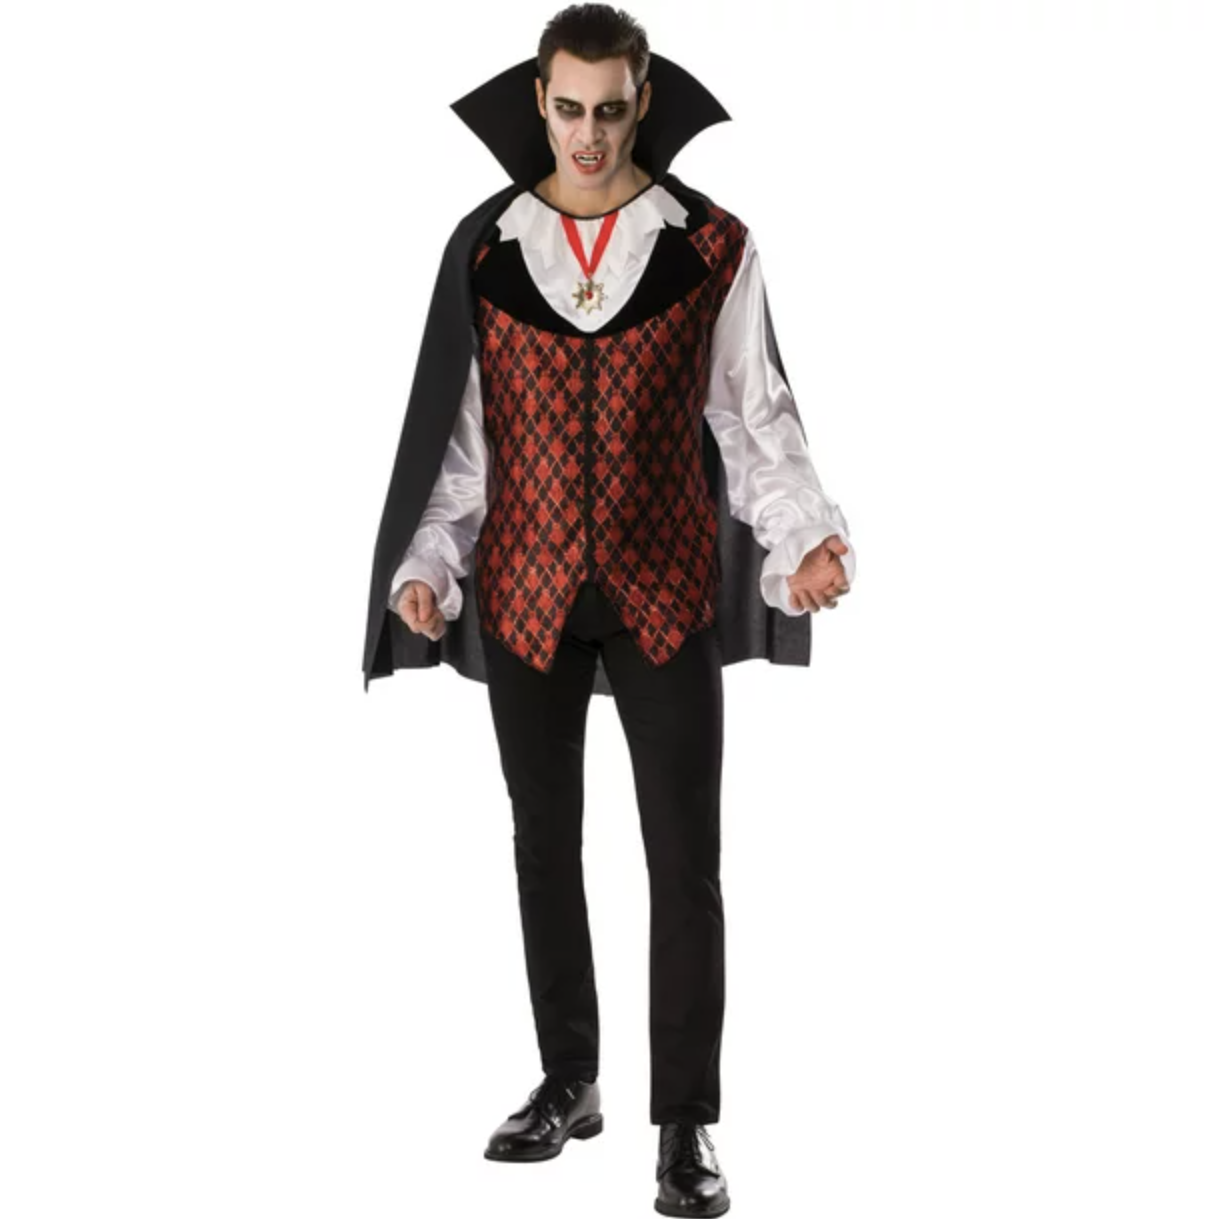 Man wearing vampire costume with cape, vest, long billowy white sleeves, pants, and shiny shoes